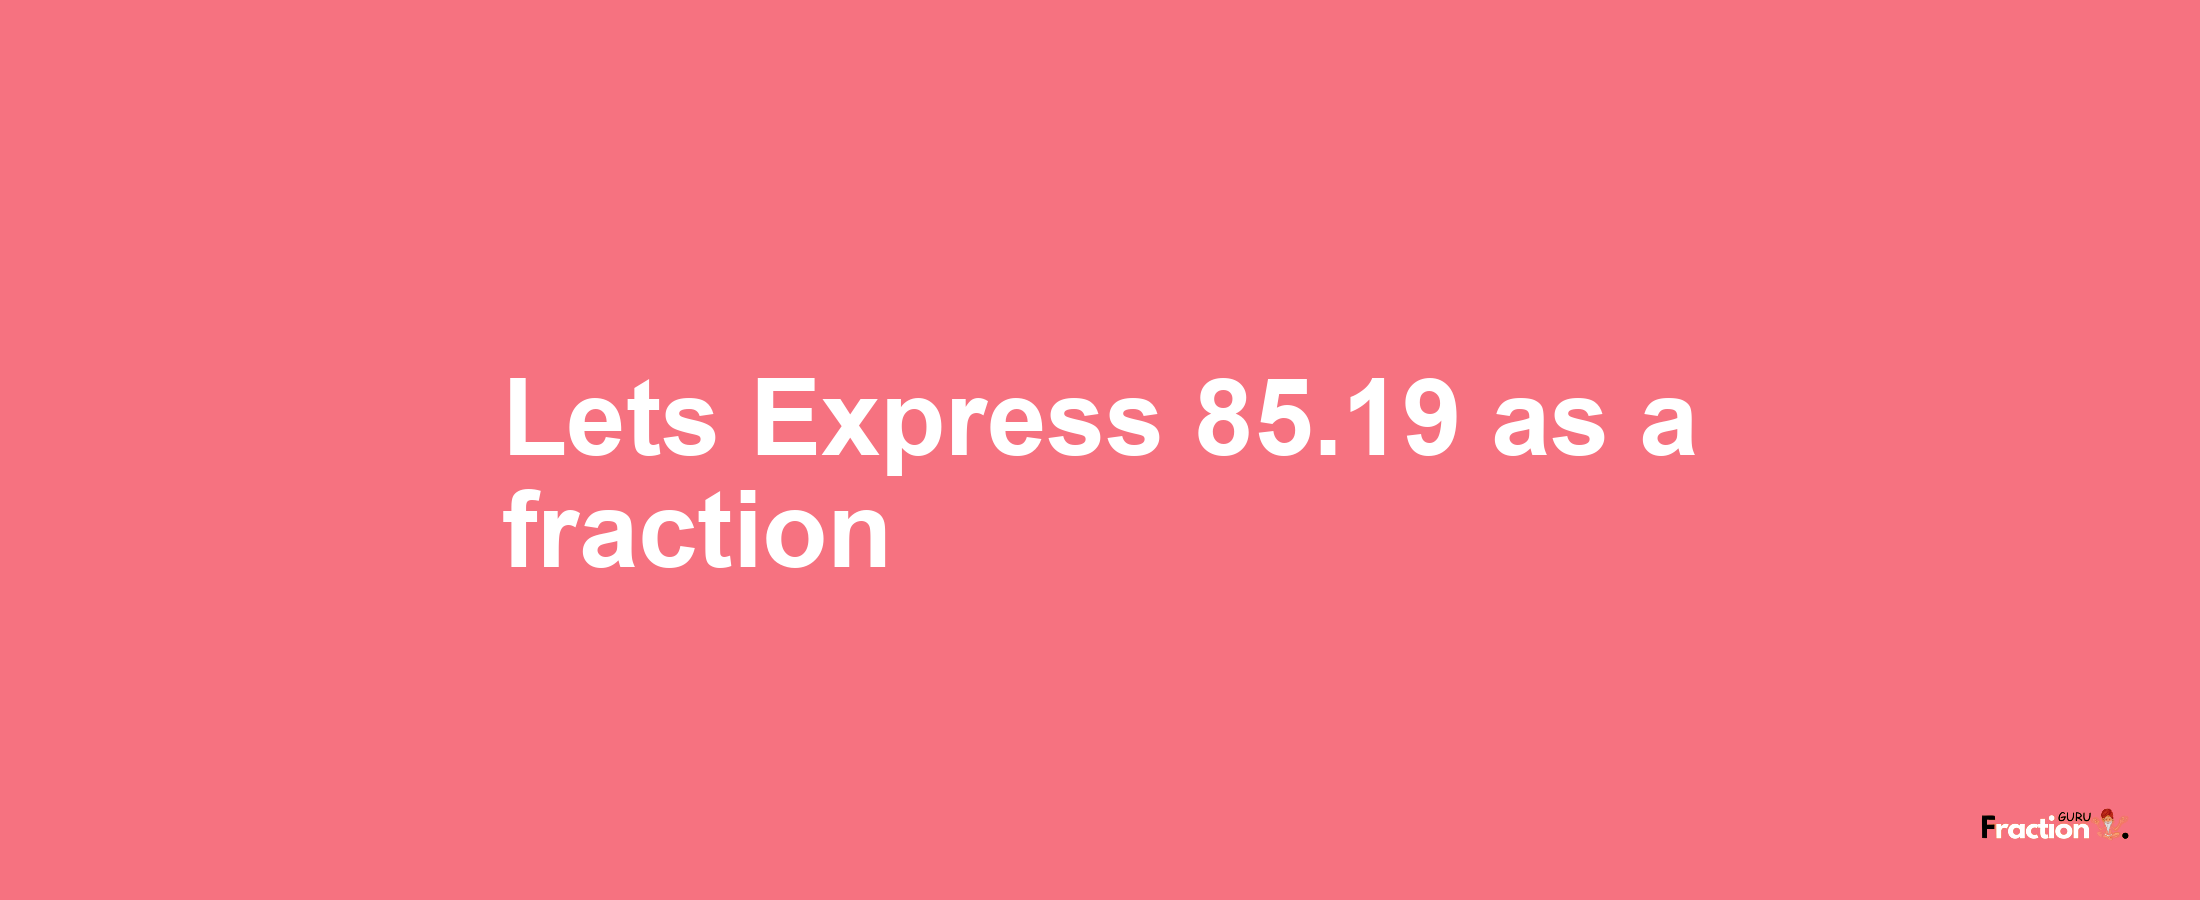 Lets Express 85.19 as afraction